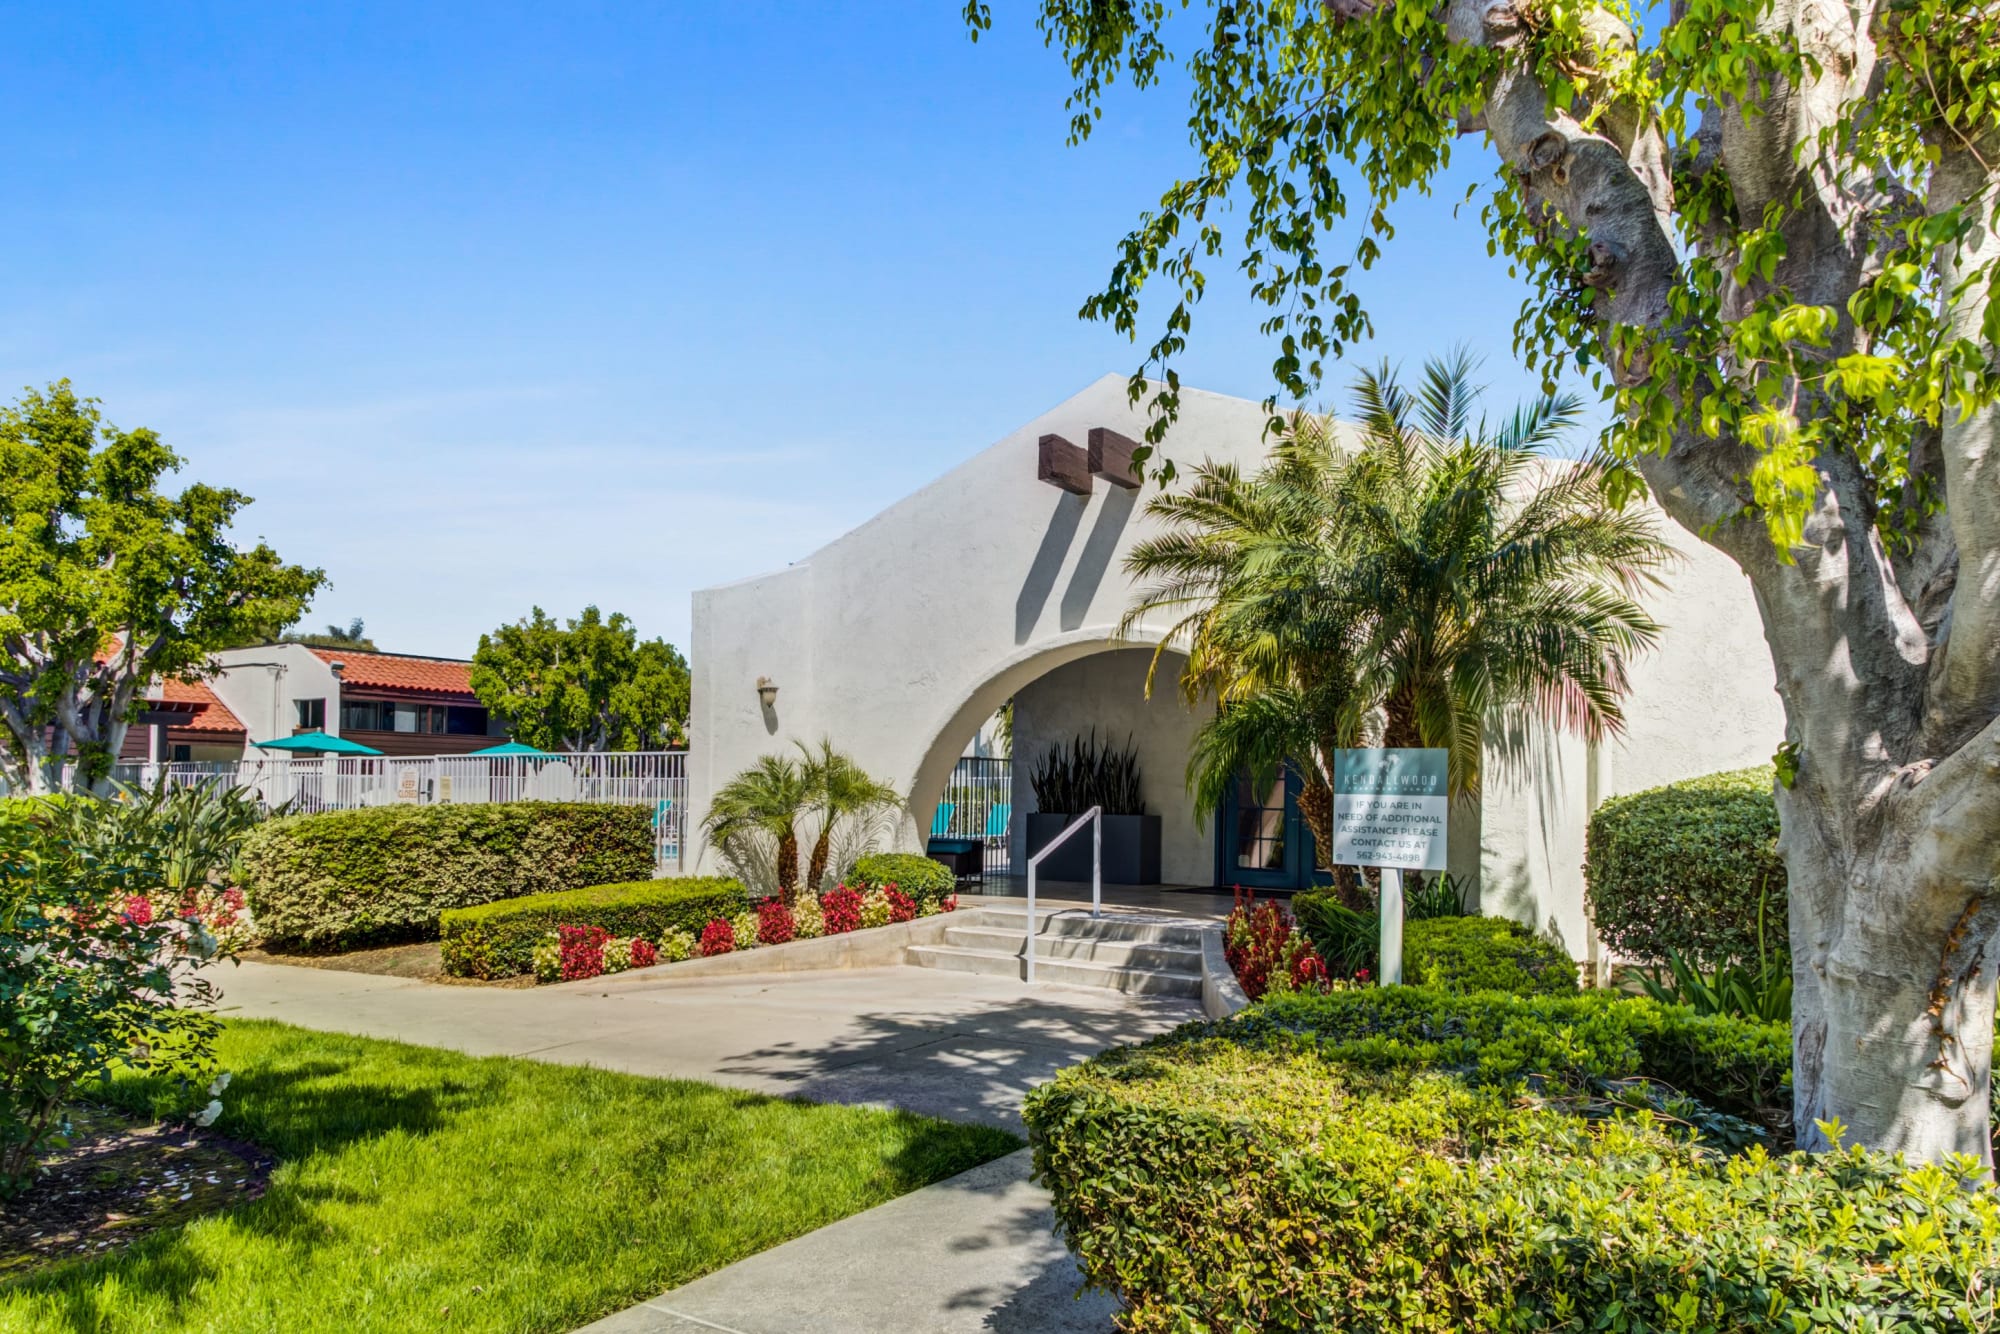 The leasing office entryway surrounded by lush palm trees at Kendallwood Apartments in Whittier, California